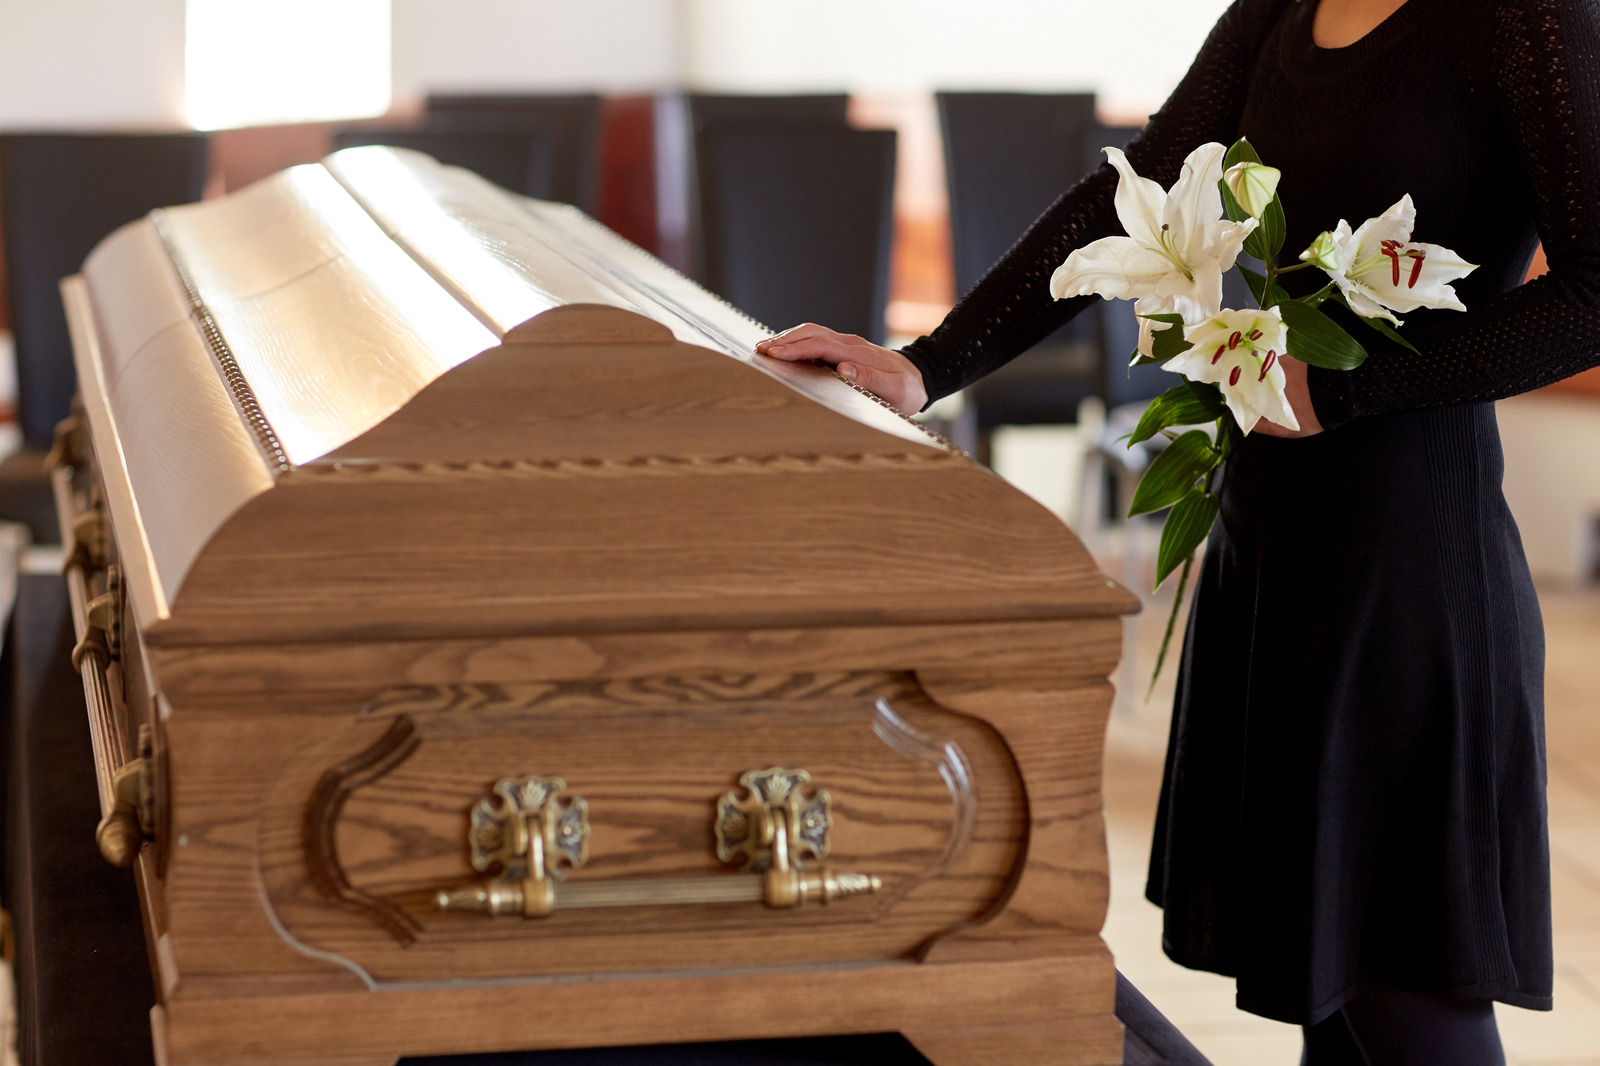 Funeral etiquette: the dos and don’ts of attending a funeral